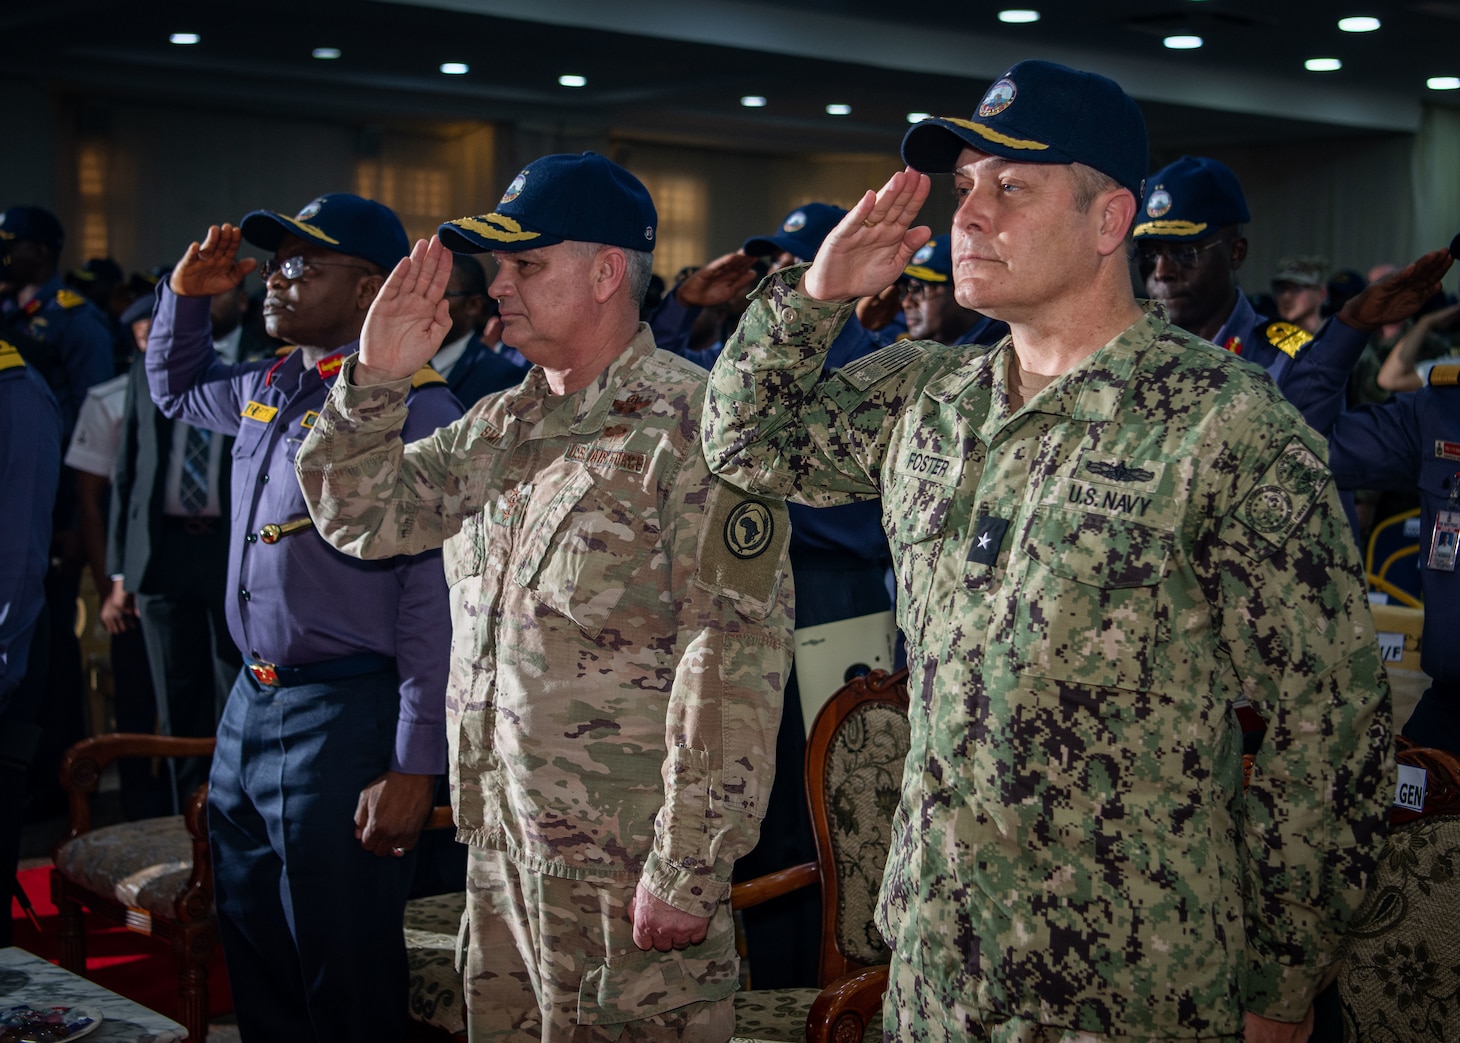 230203-N-DK722-1001 (Feb. 3, 2023) LAGOS, Nigeria – From right, U.S. Navy Rear Adm. Calvin Foster, director of the Maritime Partnership Program for U.S. Sixth Fleet, U.S. Air Force Lt. Gen. Kirk Smith, deputy commander of U.S. Africa Command, and Nigerian Navy Vice Adm. Awwal Gambo, Chief of Naval Staff, salute the Nigerian National Anthem during the Obangame Express 2023 closing ceremony in Lagos, Nigeria, Feb. 3, 2023. Obangame Express 2023, conducted by U.S. Naval Forces Africa, is a maritime exercise designed to improve cooperation, and increase maritime safety and security among participating nations in the Gulf of Guinea and Southern Atlantic Ocean. U.S. Sixth Fleet, headquartered in Naples, Italy, conducts the full spectrum of joint and naval operations, often in concert with allied and interagency partners, in order to advance U.S. national interests and security and stability in Europe and Africa. (U.S. Navy photo by Mass Communication Specialist 1st class Cameron C. Edy)